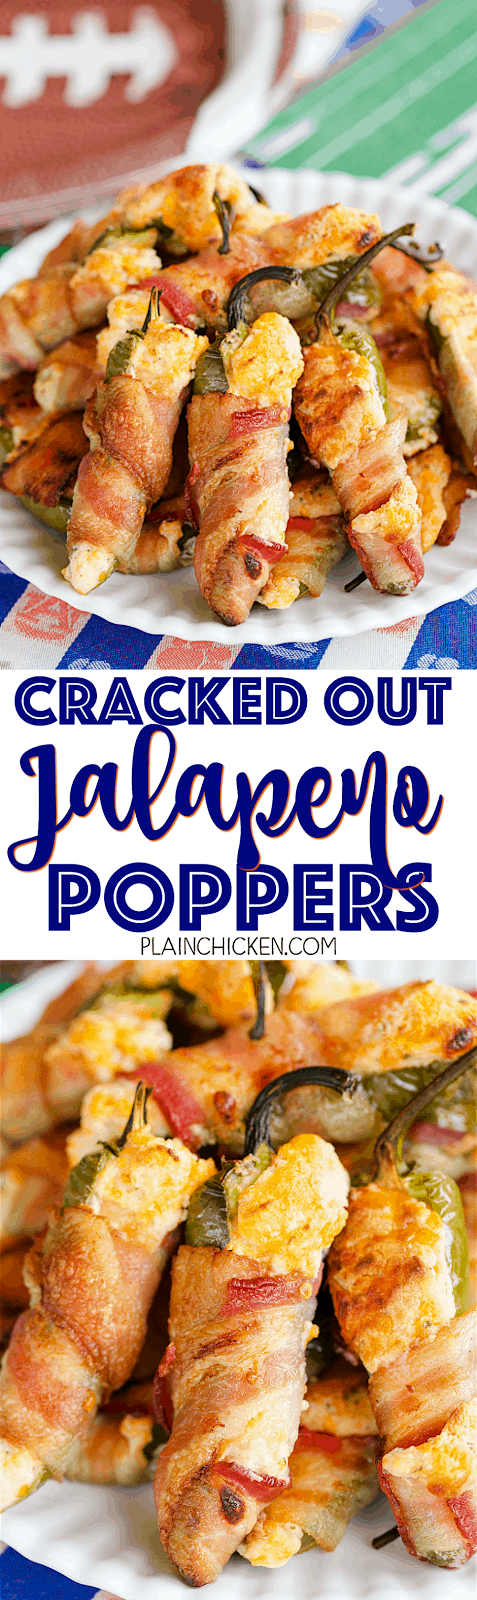 Cracked Out Jalapeño Poppers - jalapeños stuffed with cream cheese, cheddar, and Ranch and wrapped in bacon. These things are CRAZY good! I took them to a party and they were gone in a flash! Can make ahead of time and bake when ready. Tastes great warm and at room temperature. 